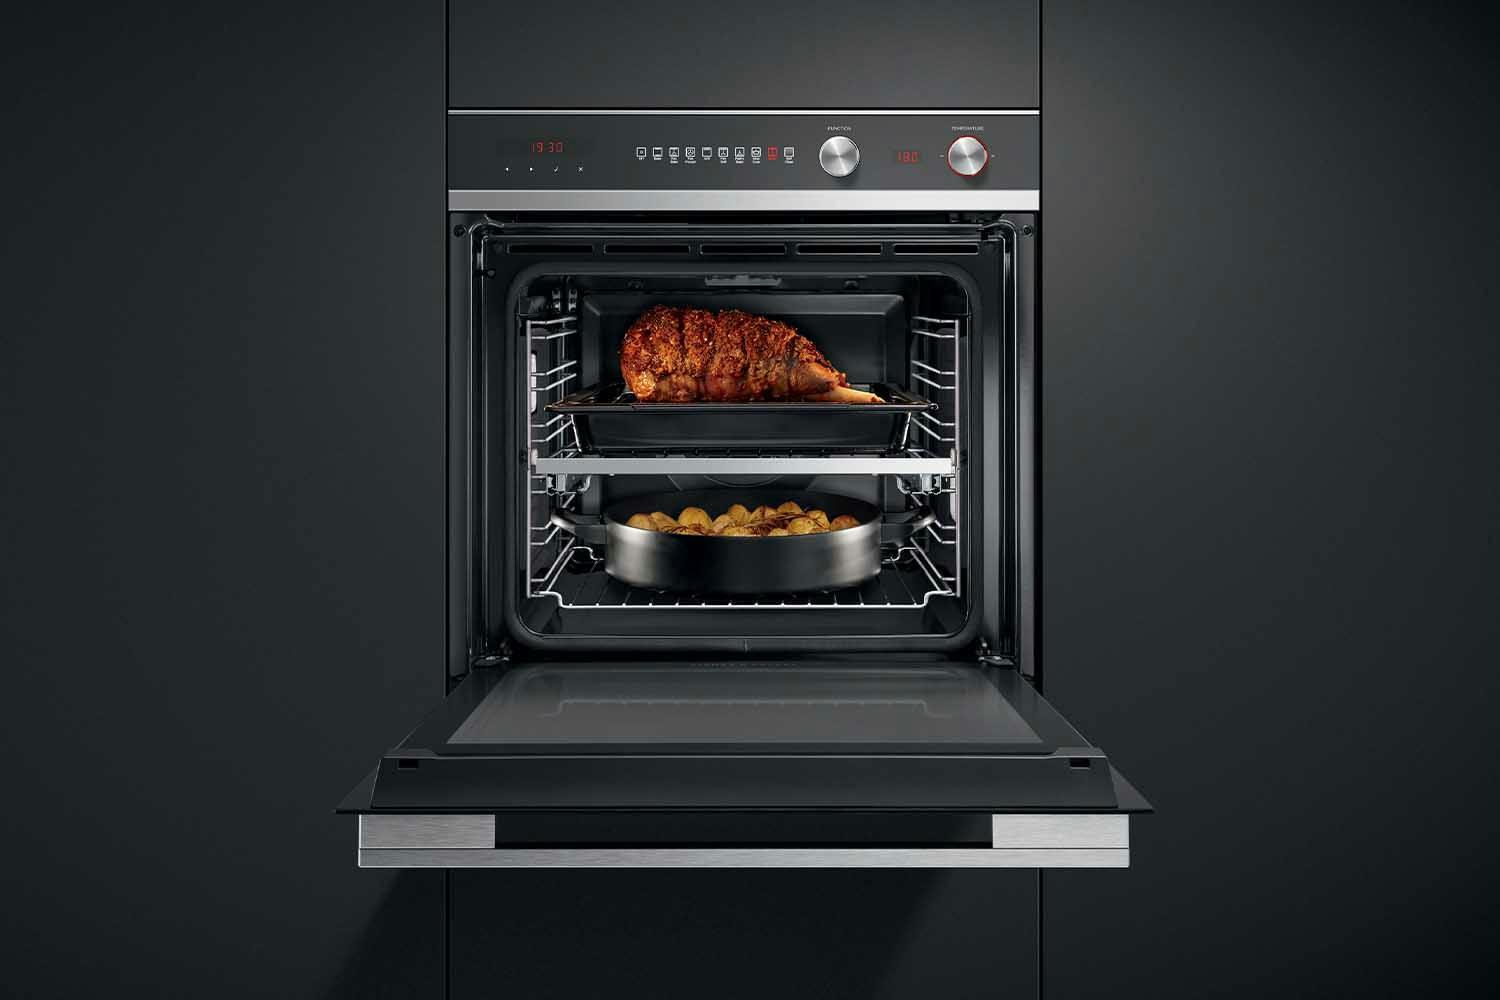 Fisher & Paykel 60cm 9 Function Pyrolytic Oven